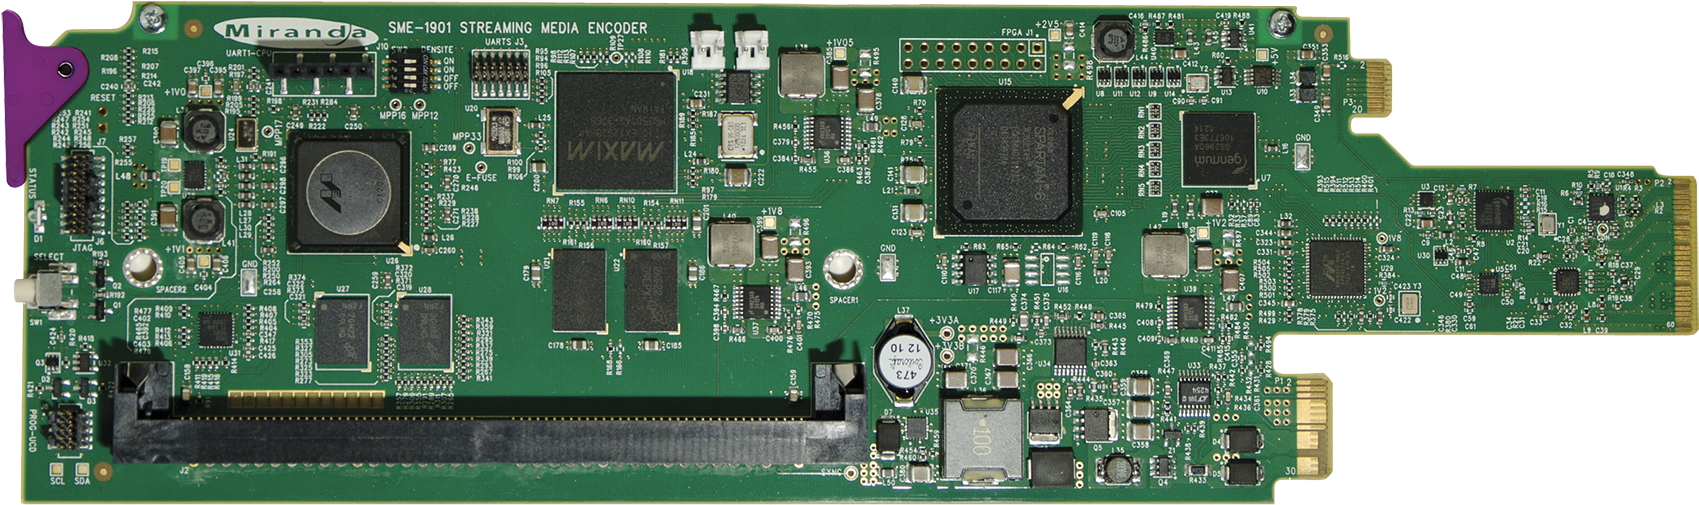 A Close-up Of A Green Circuit Board